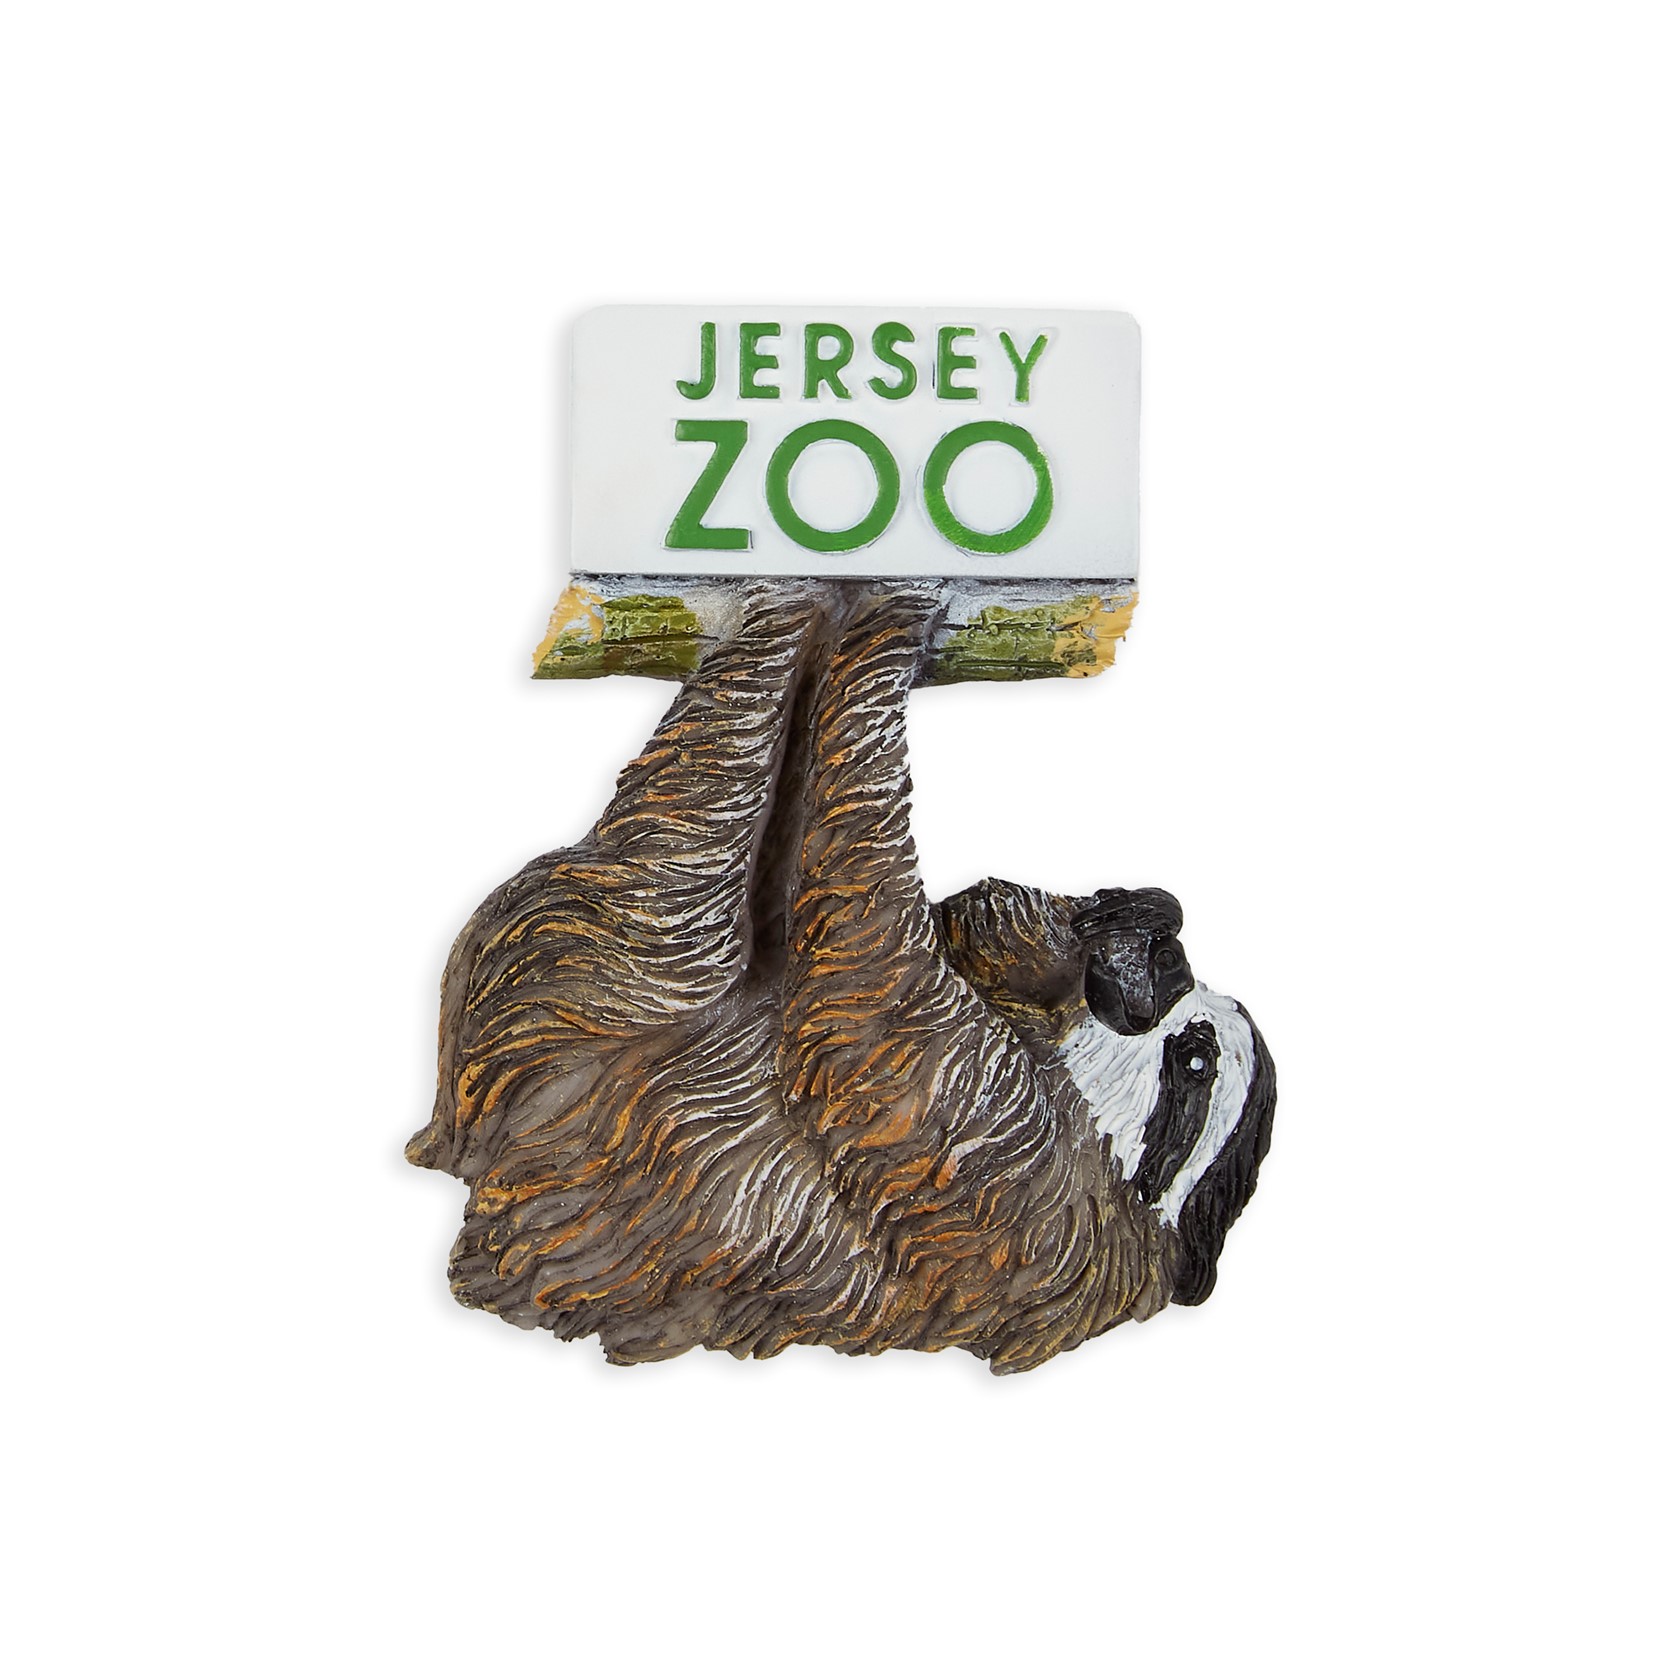 Jersey Zoo Resin Sloth Magnet